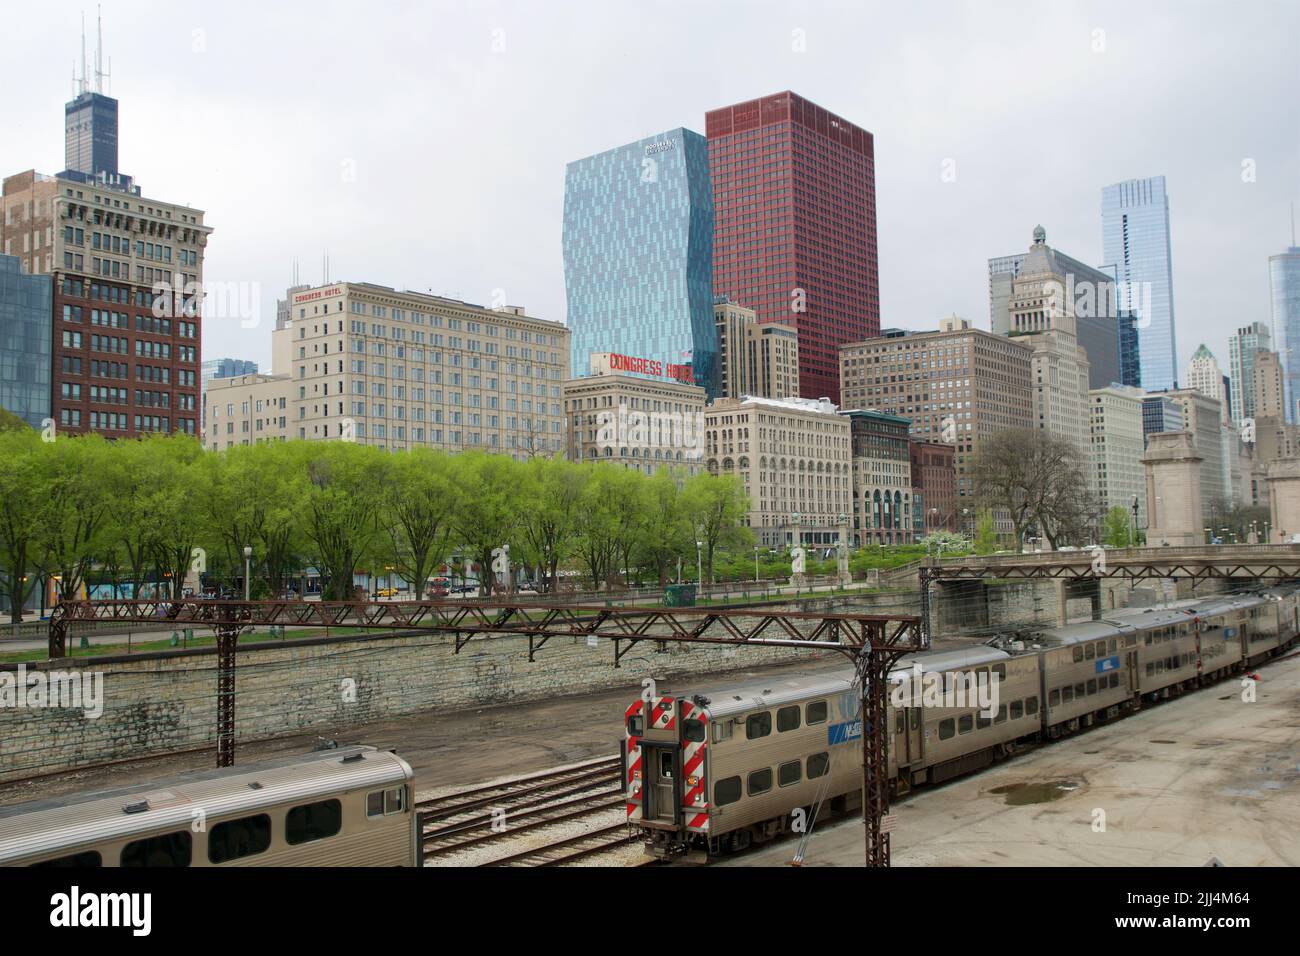 CHICAGO, ILLINOIS, UNITED STATES - MAY 12, 2018: Tracks with switches and trains in downtown Chicago's Grant Park with the skyline in the background Stock Photo